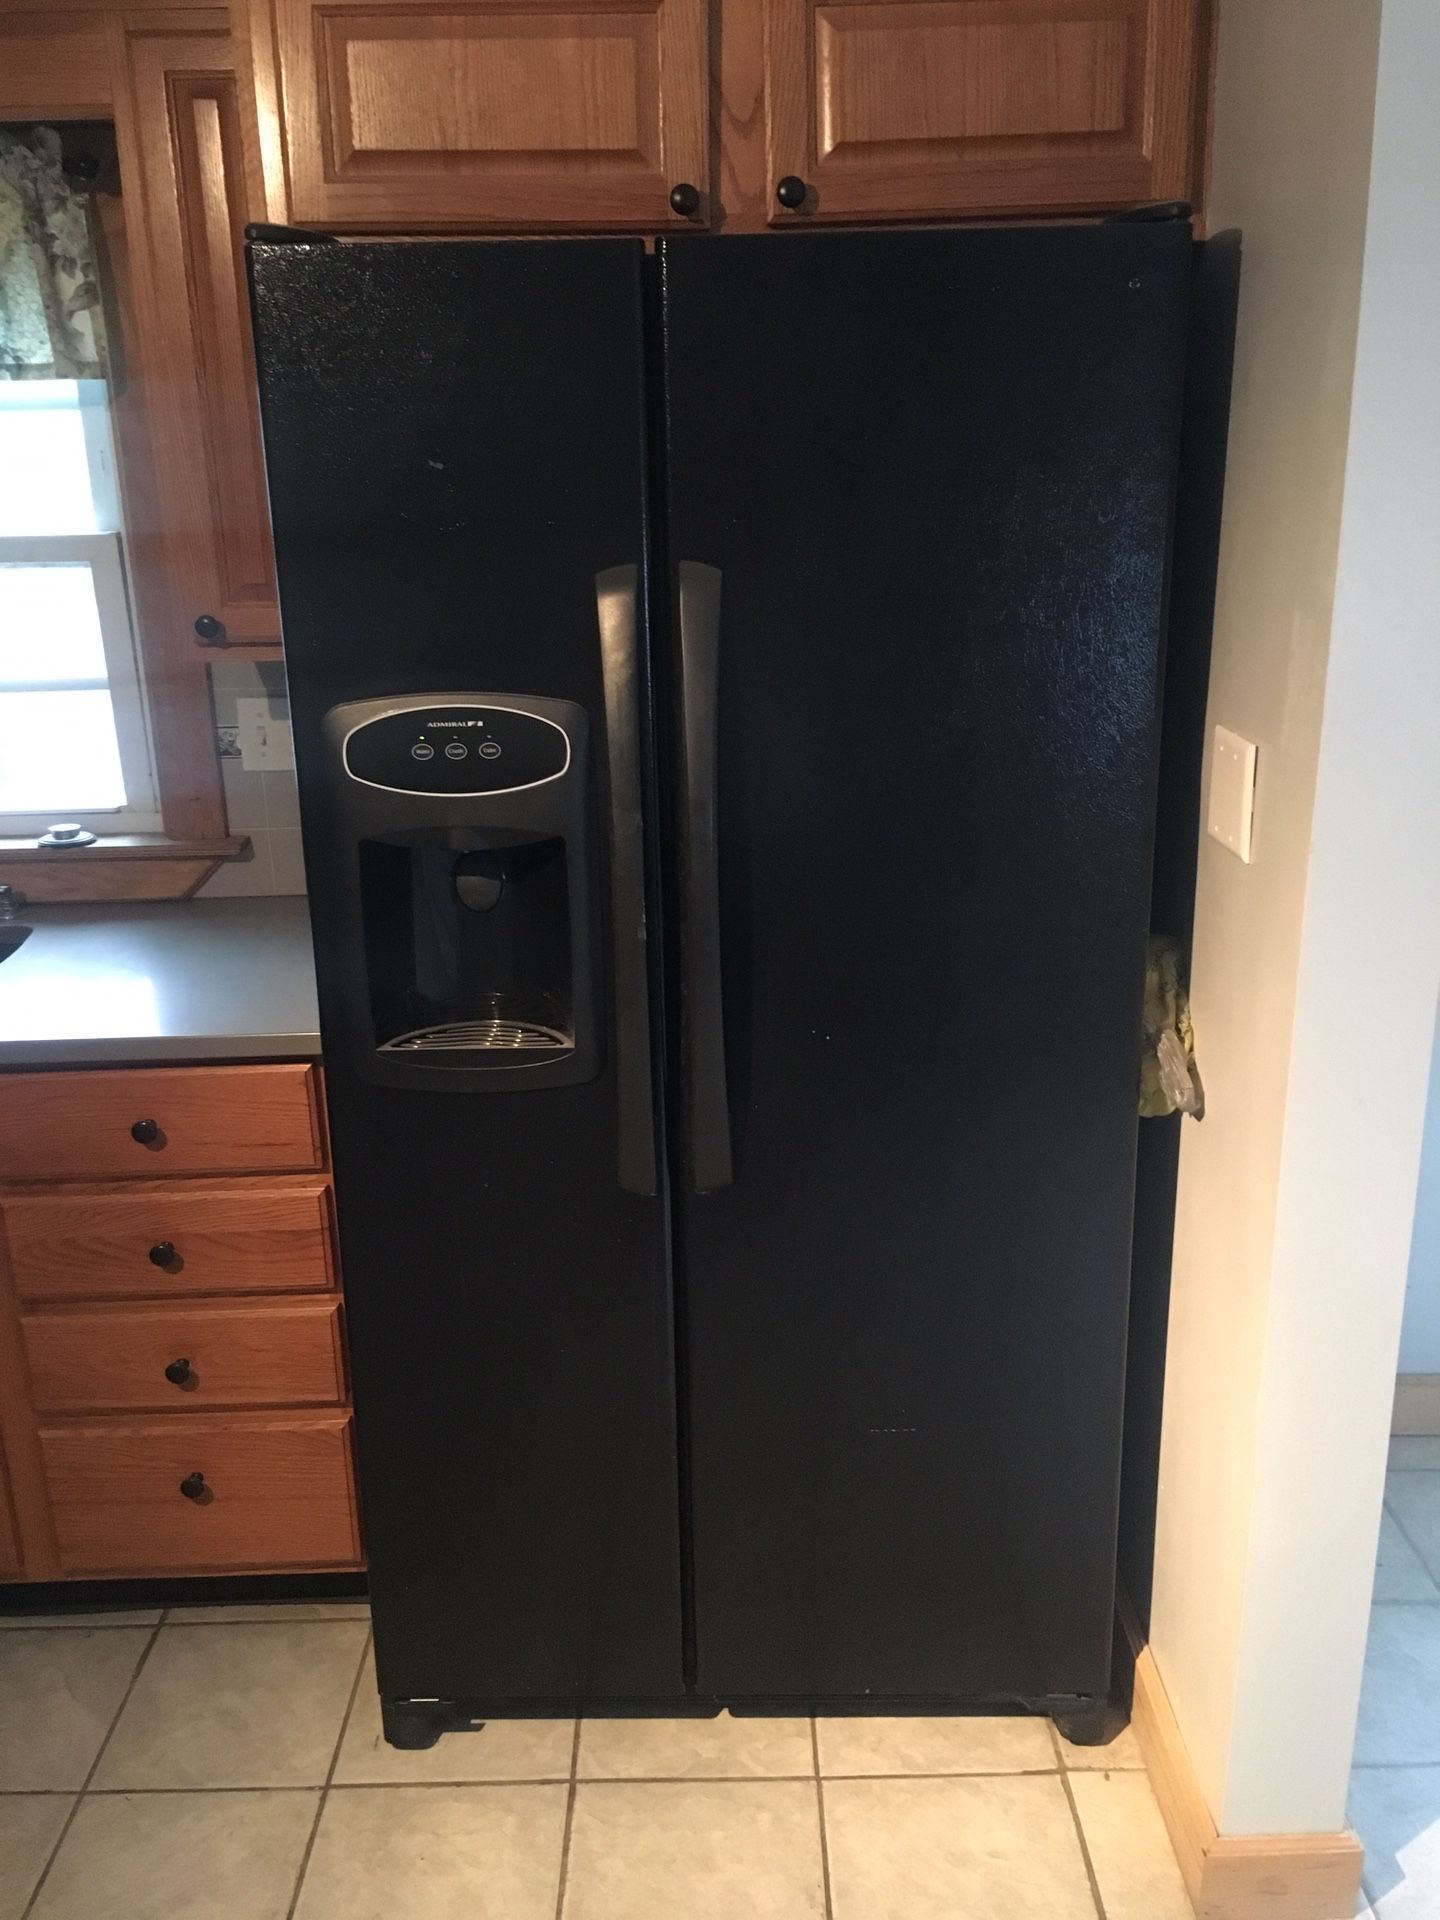 Matching kitchen appliances ( refrigerator, dish washer and electric oven)